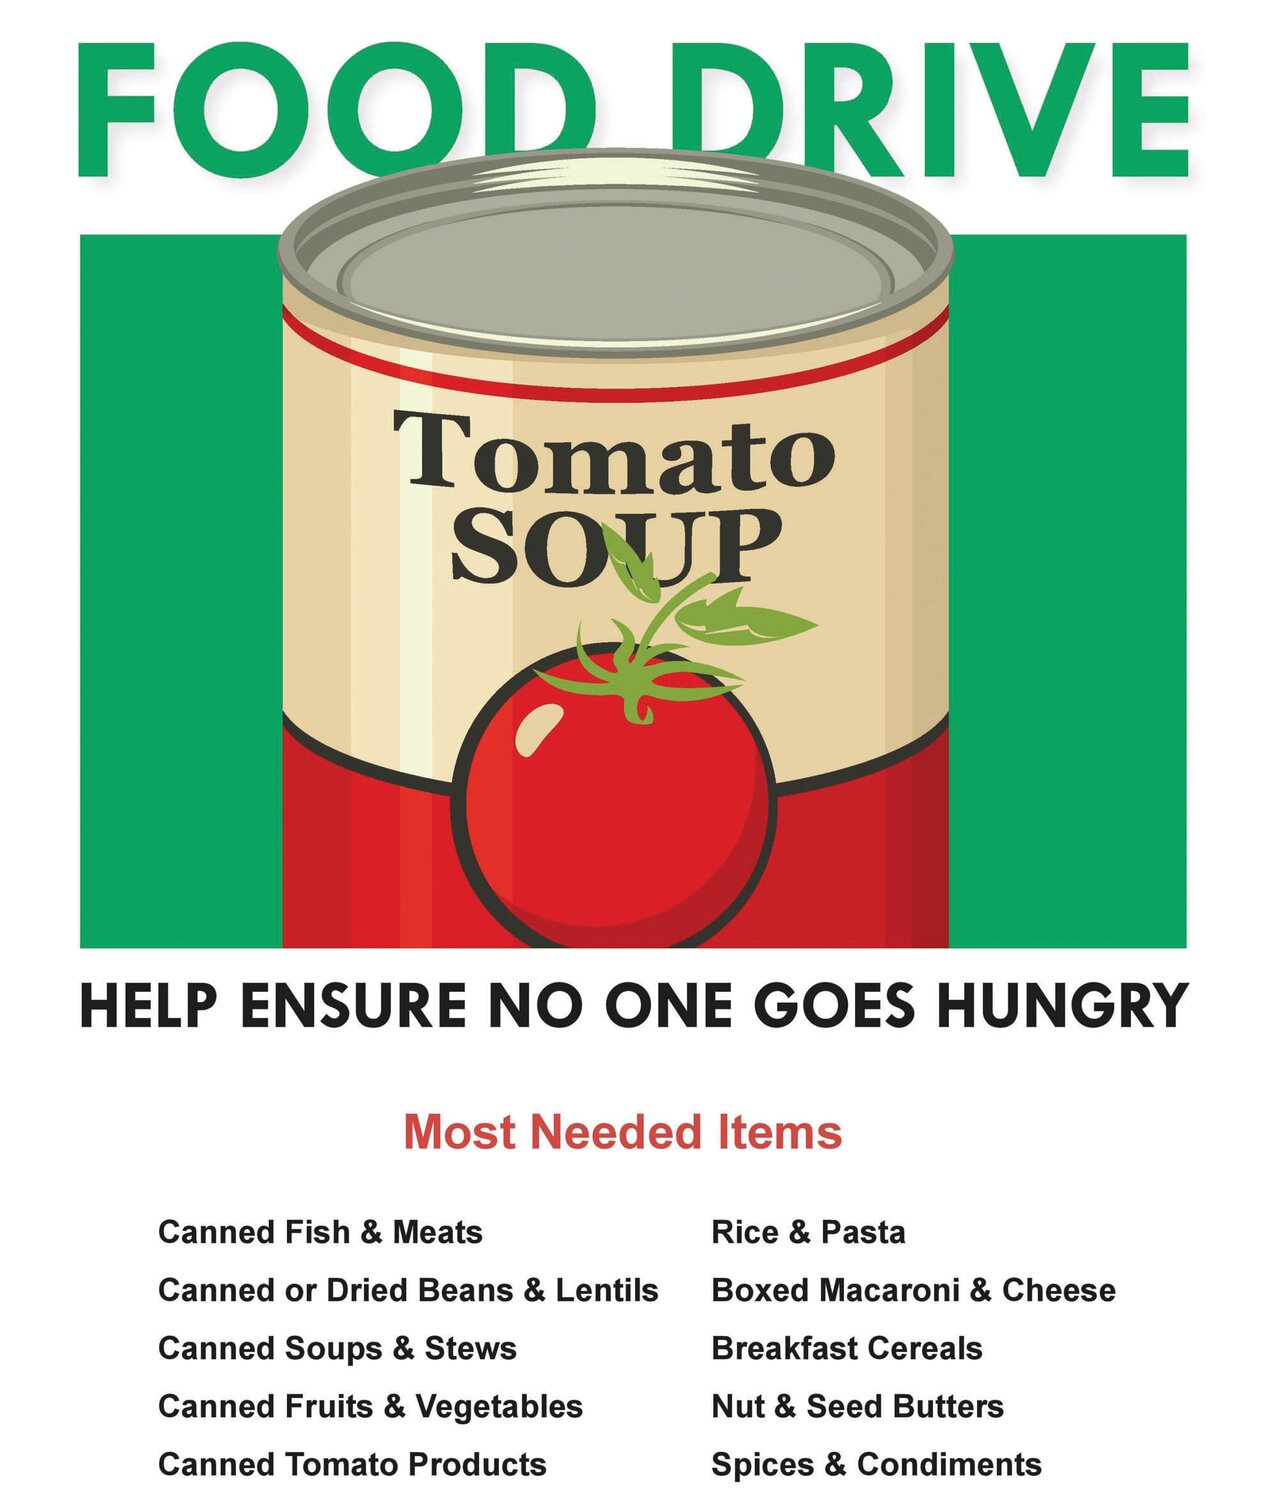 With the issue of hunger in Rhode Island on the rise in recent months as a result of the end of pandemic-related emergency benefits and increased costs, BankRI has kicked off a month-long food drive at all 21 of its branches. The collection will continue through Friday, August 18.